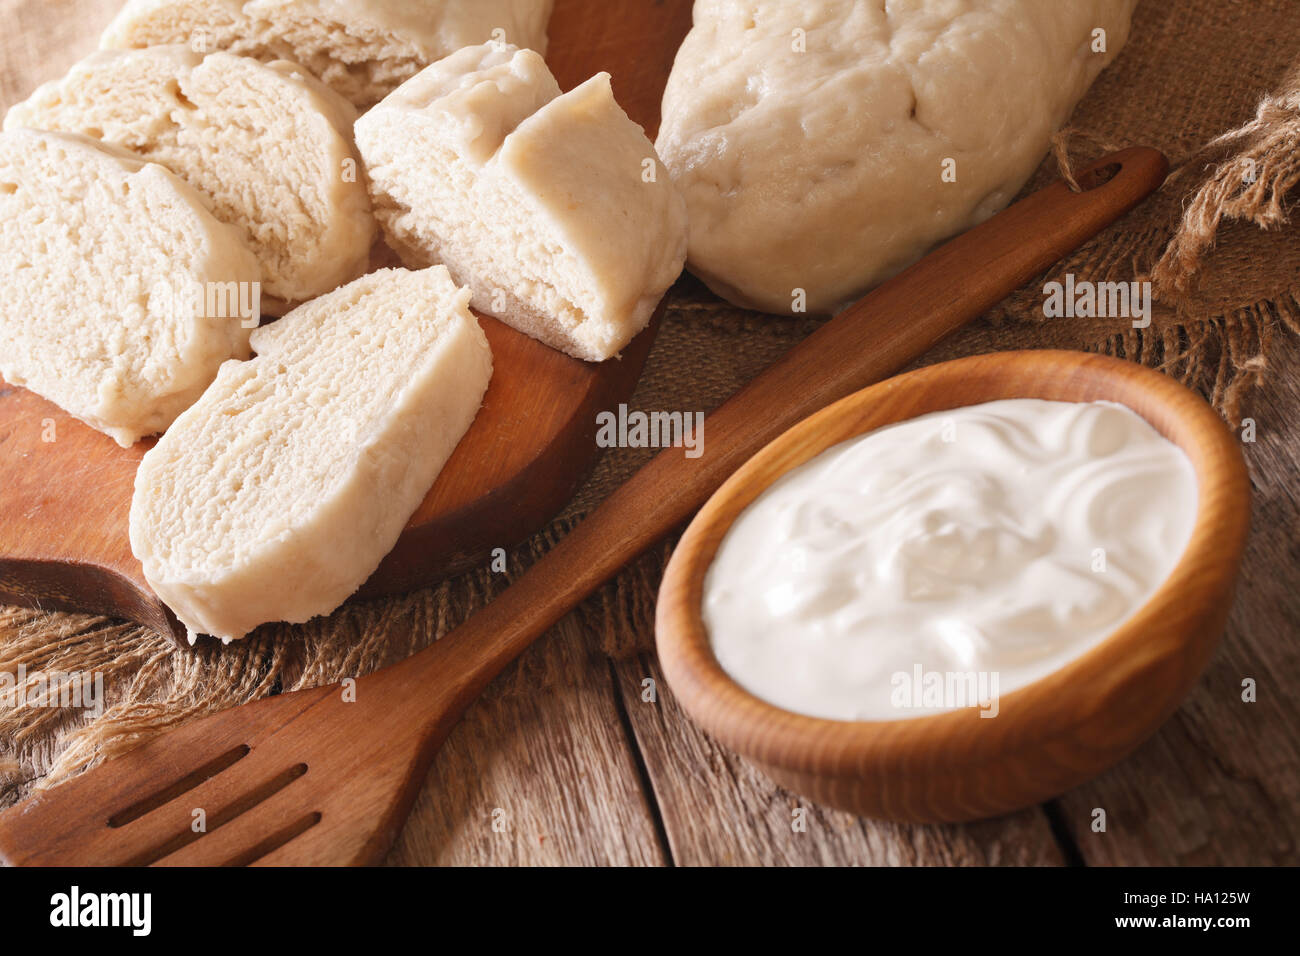 Czech sliced knedliks with sour cream close-up on the table. horizontal Stock Photo